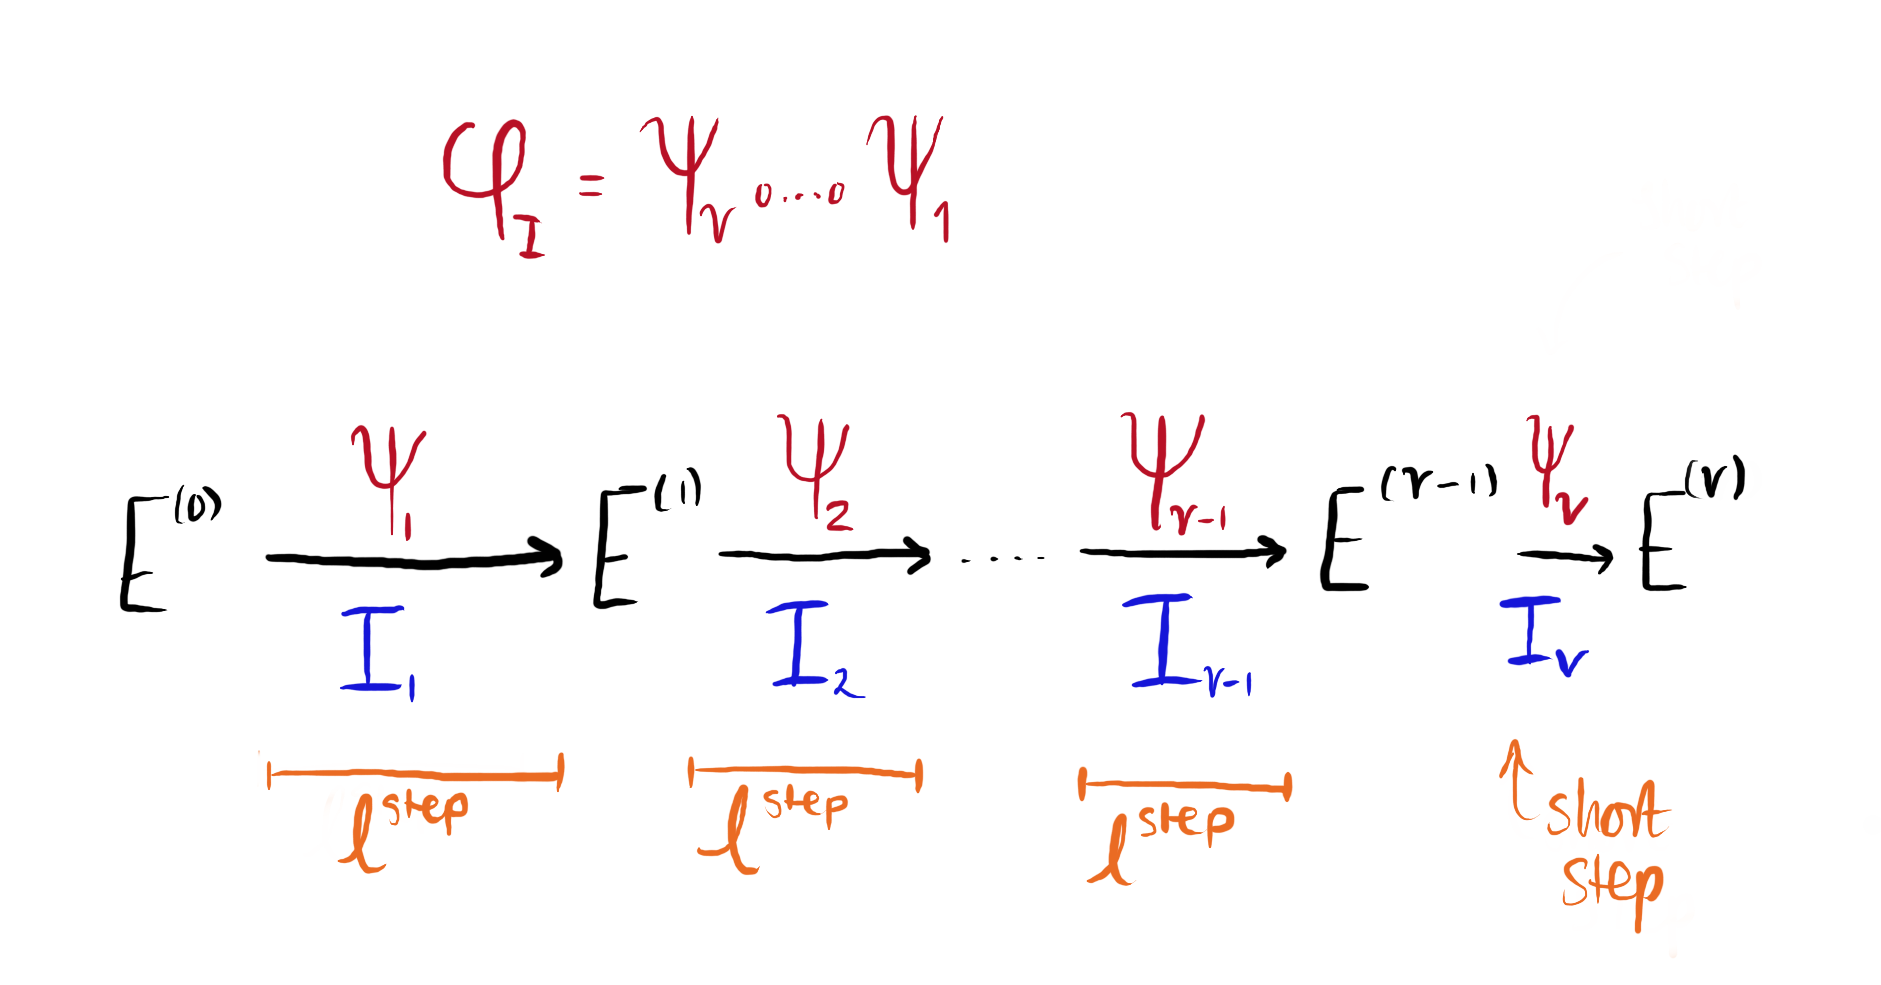 A diagram showing how the isogeny is broken up into small steps using the ideal filtration.